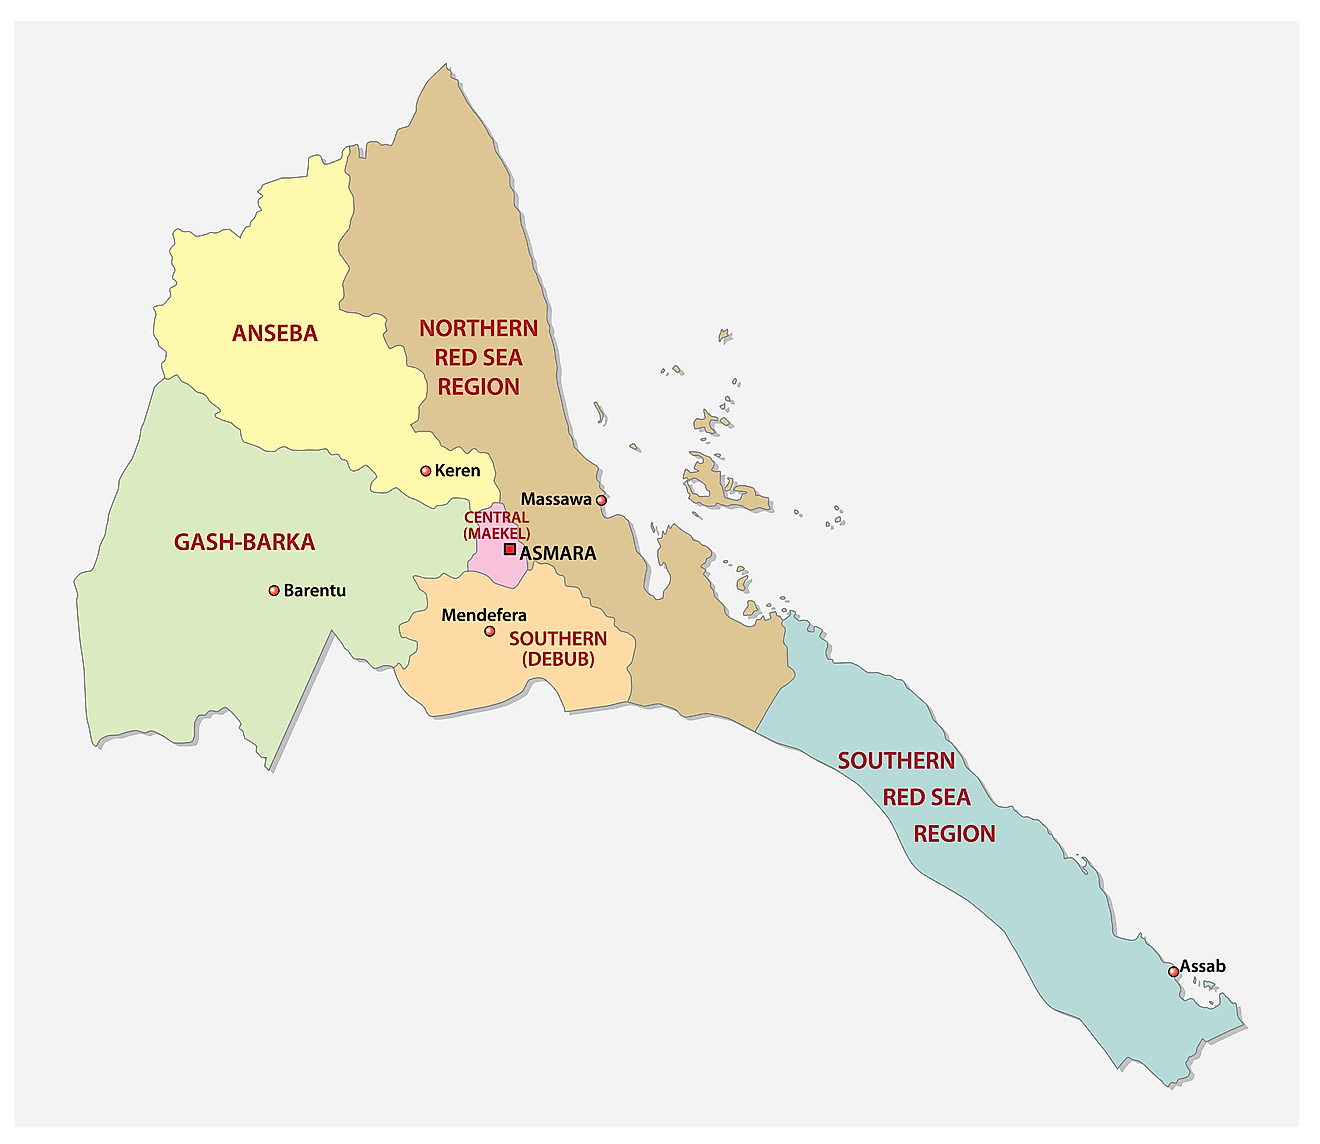 Political Map of Eritrea showing the six regions, their capitals including the national capital of Asmara.